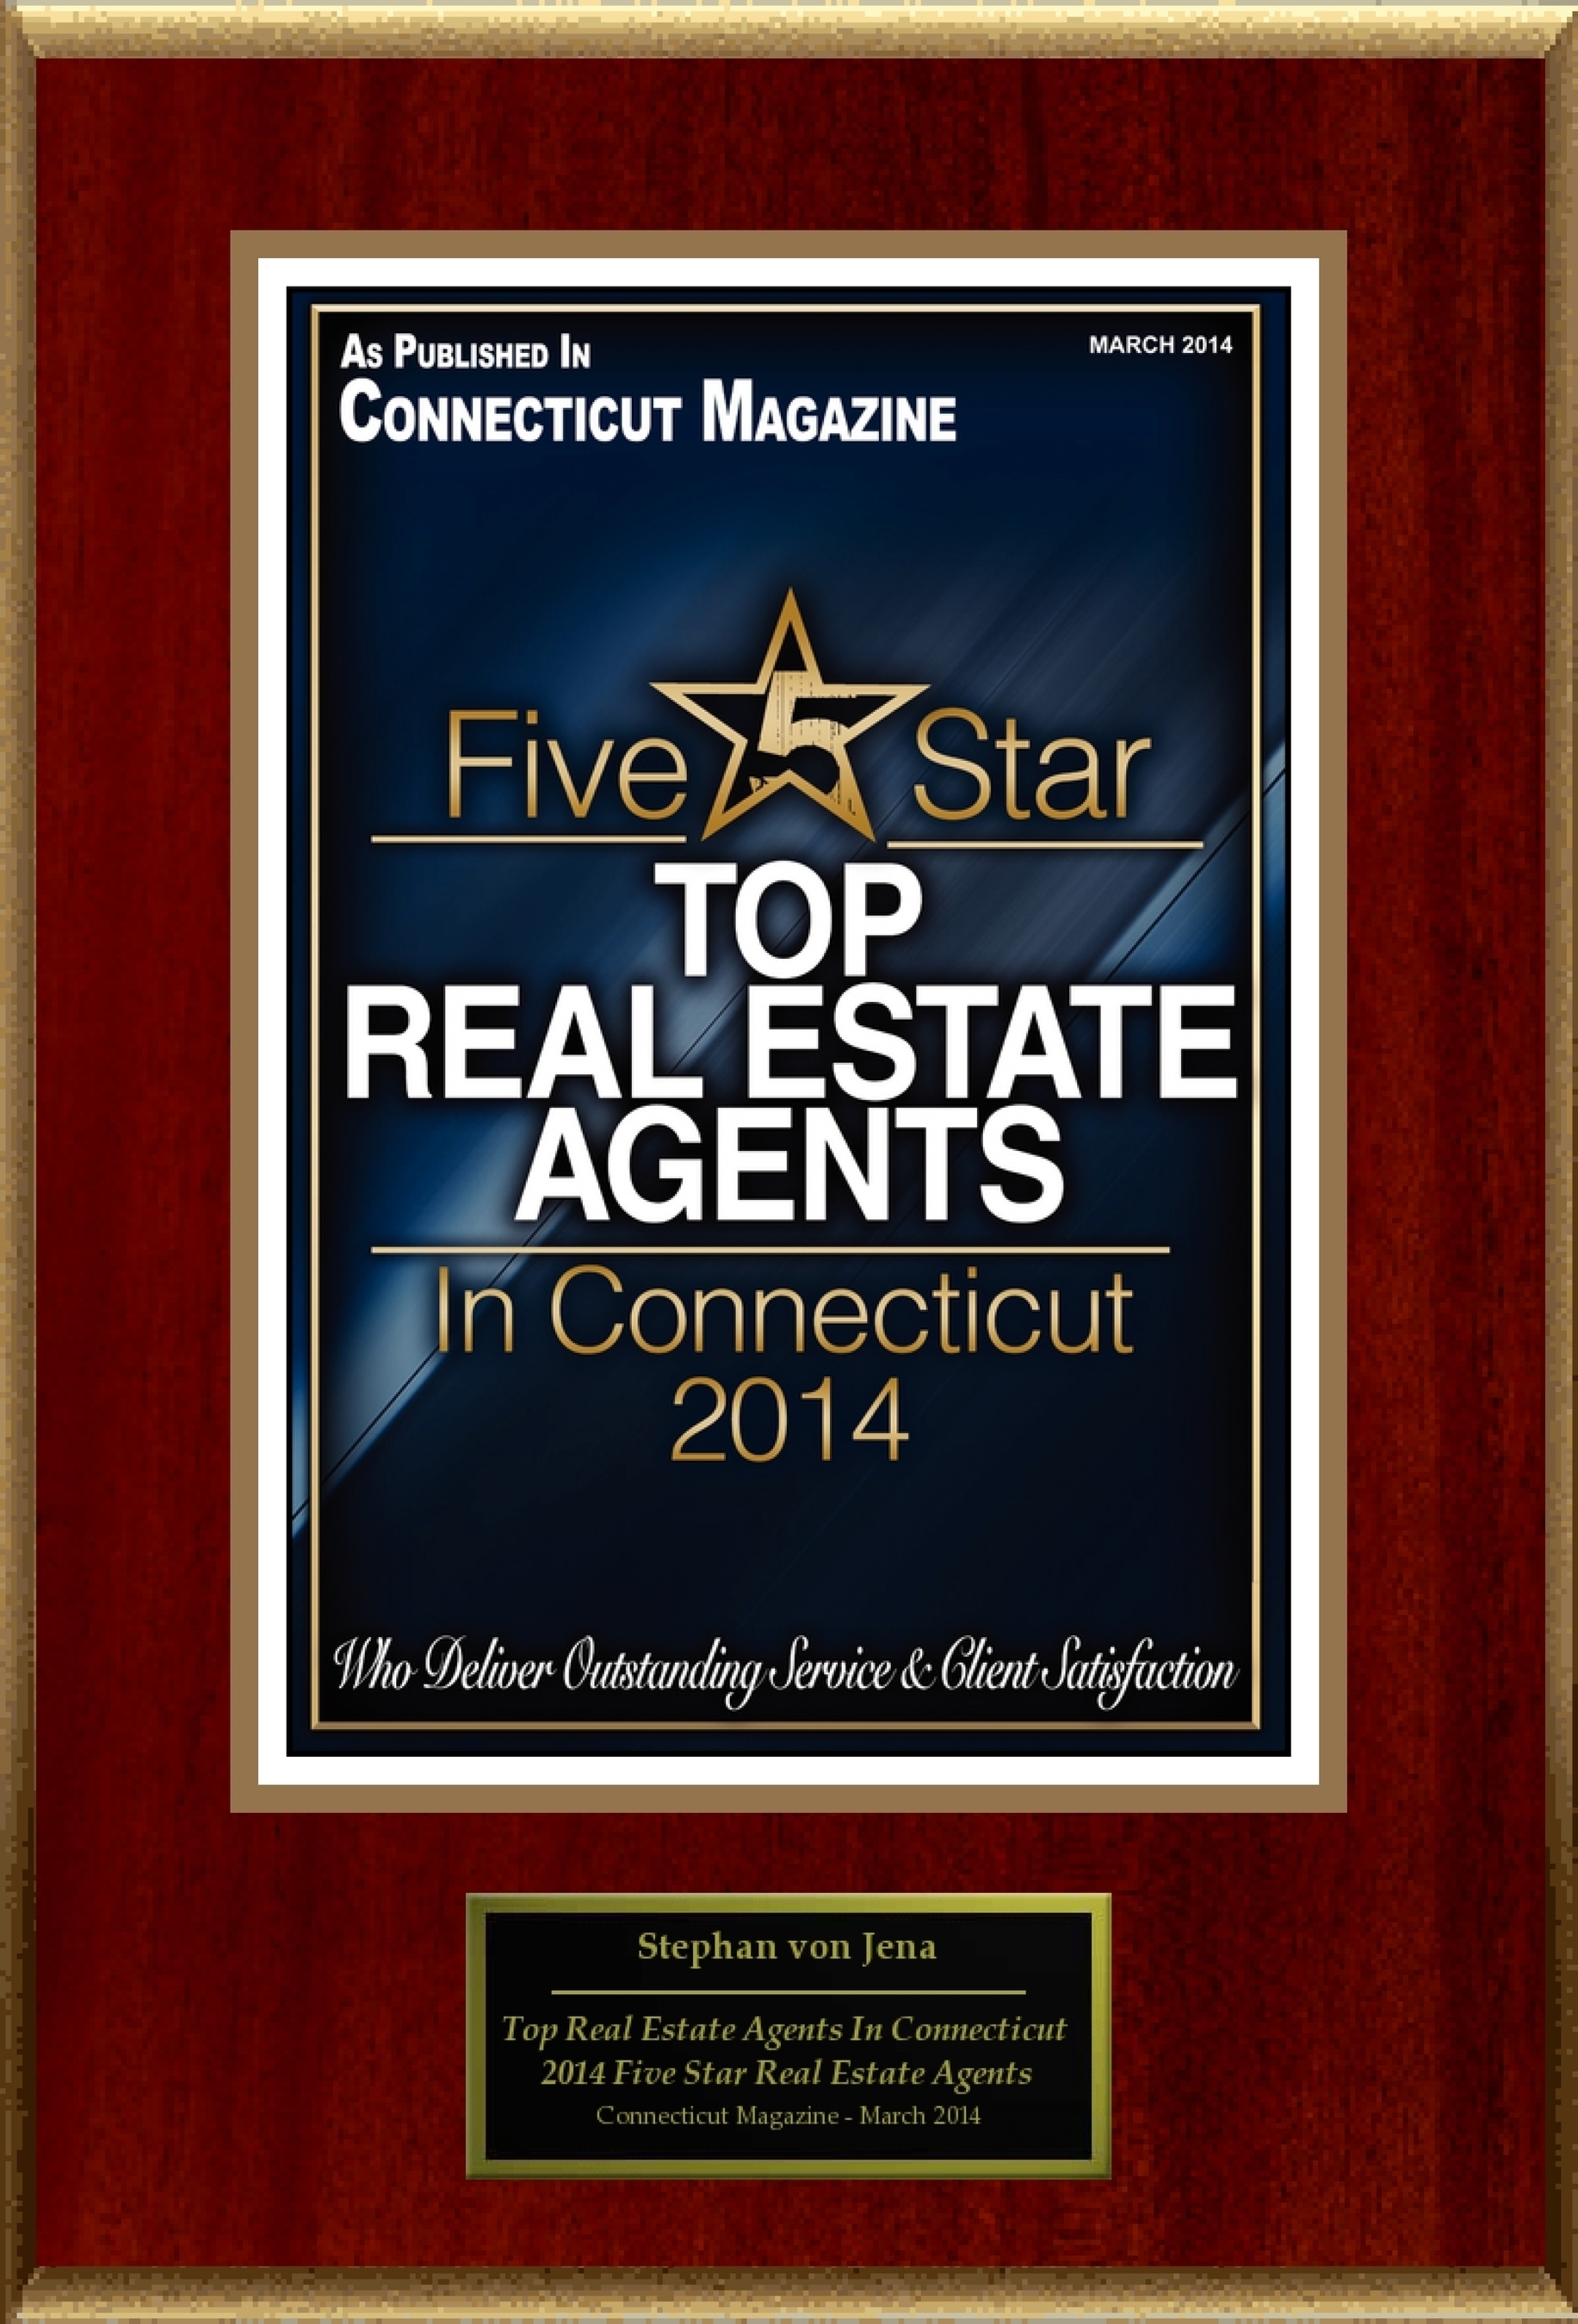 Stephan Von Jena Selected For "Top Real Estate Agents In Connecticut" (PRNewsFoto/American Registry)